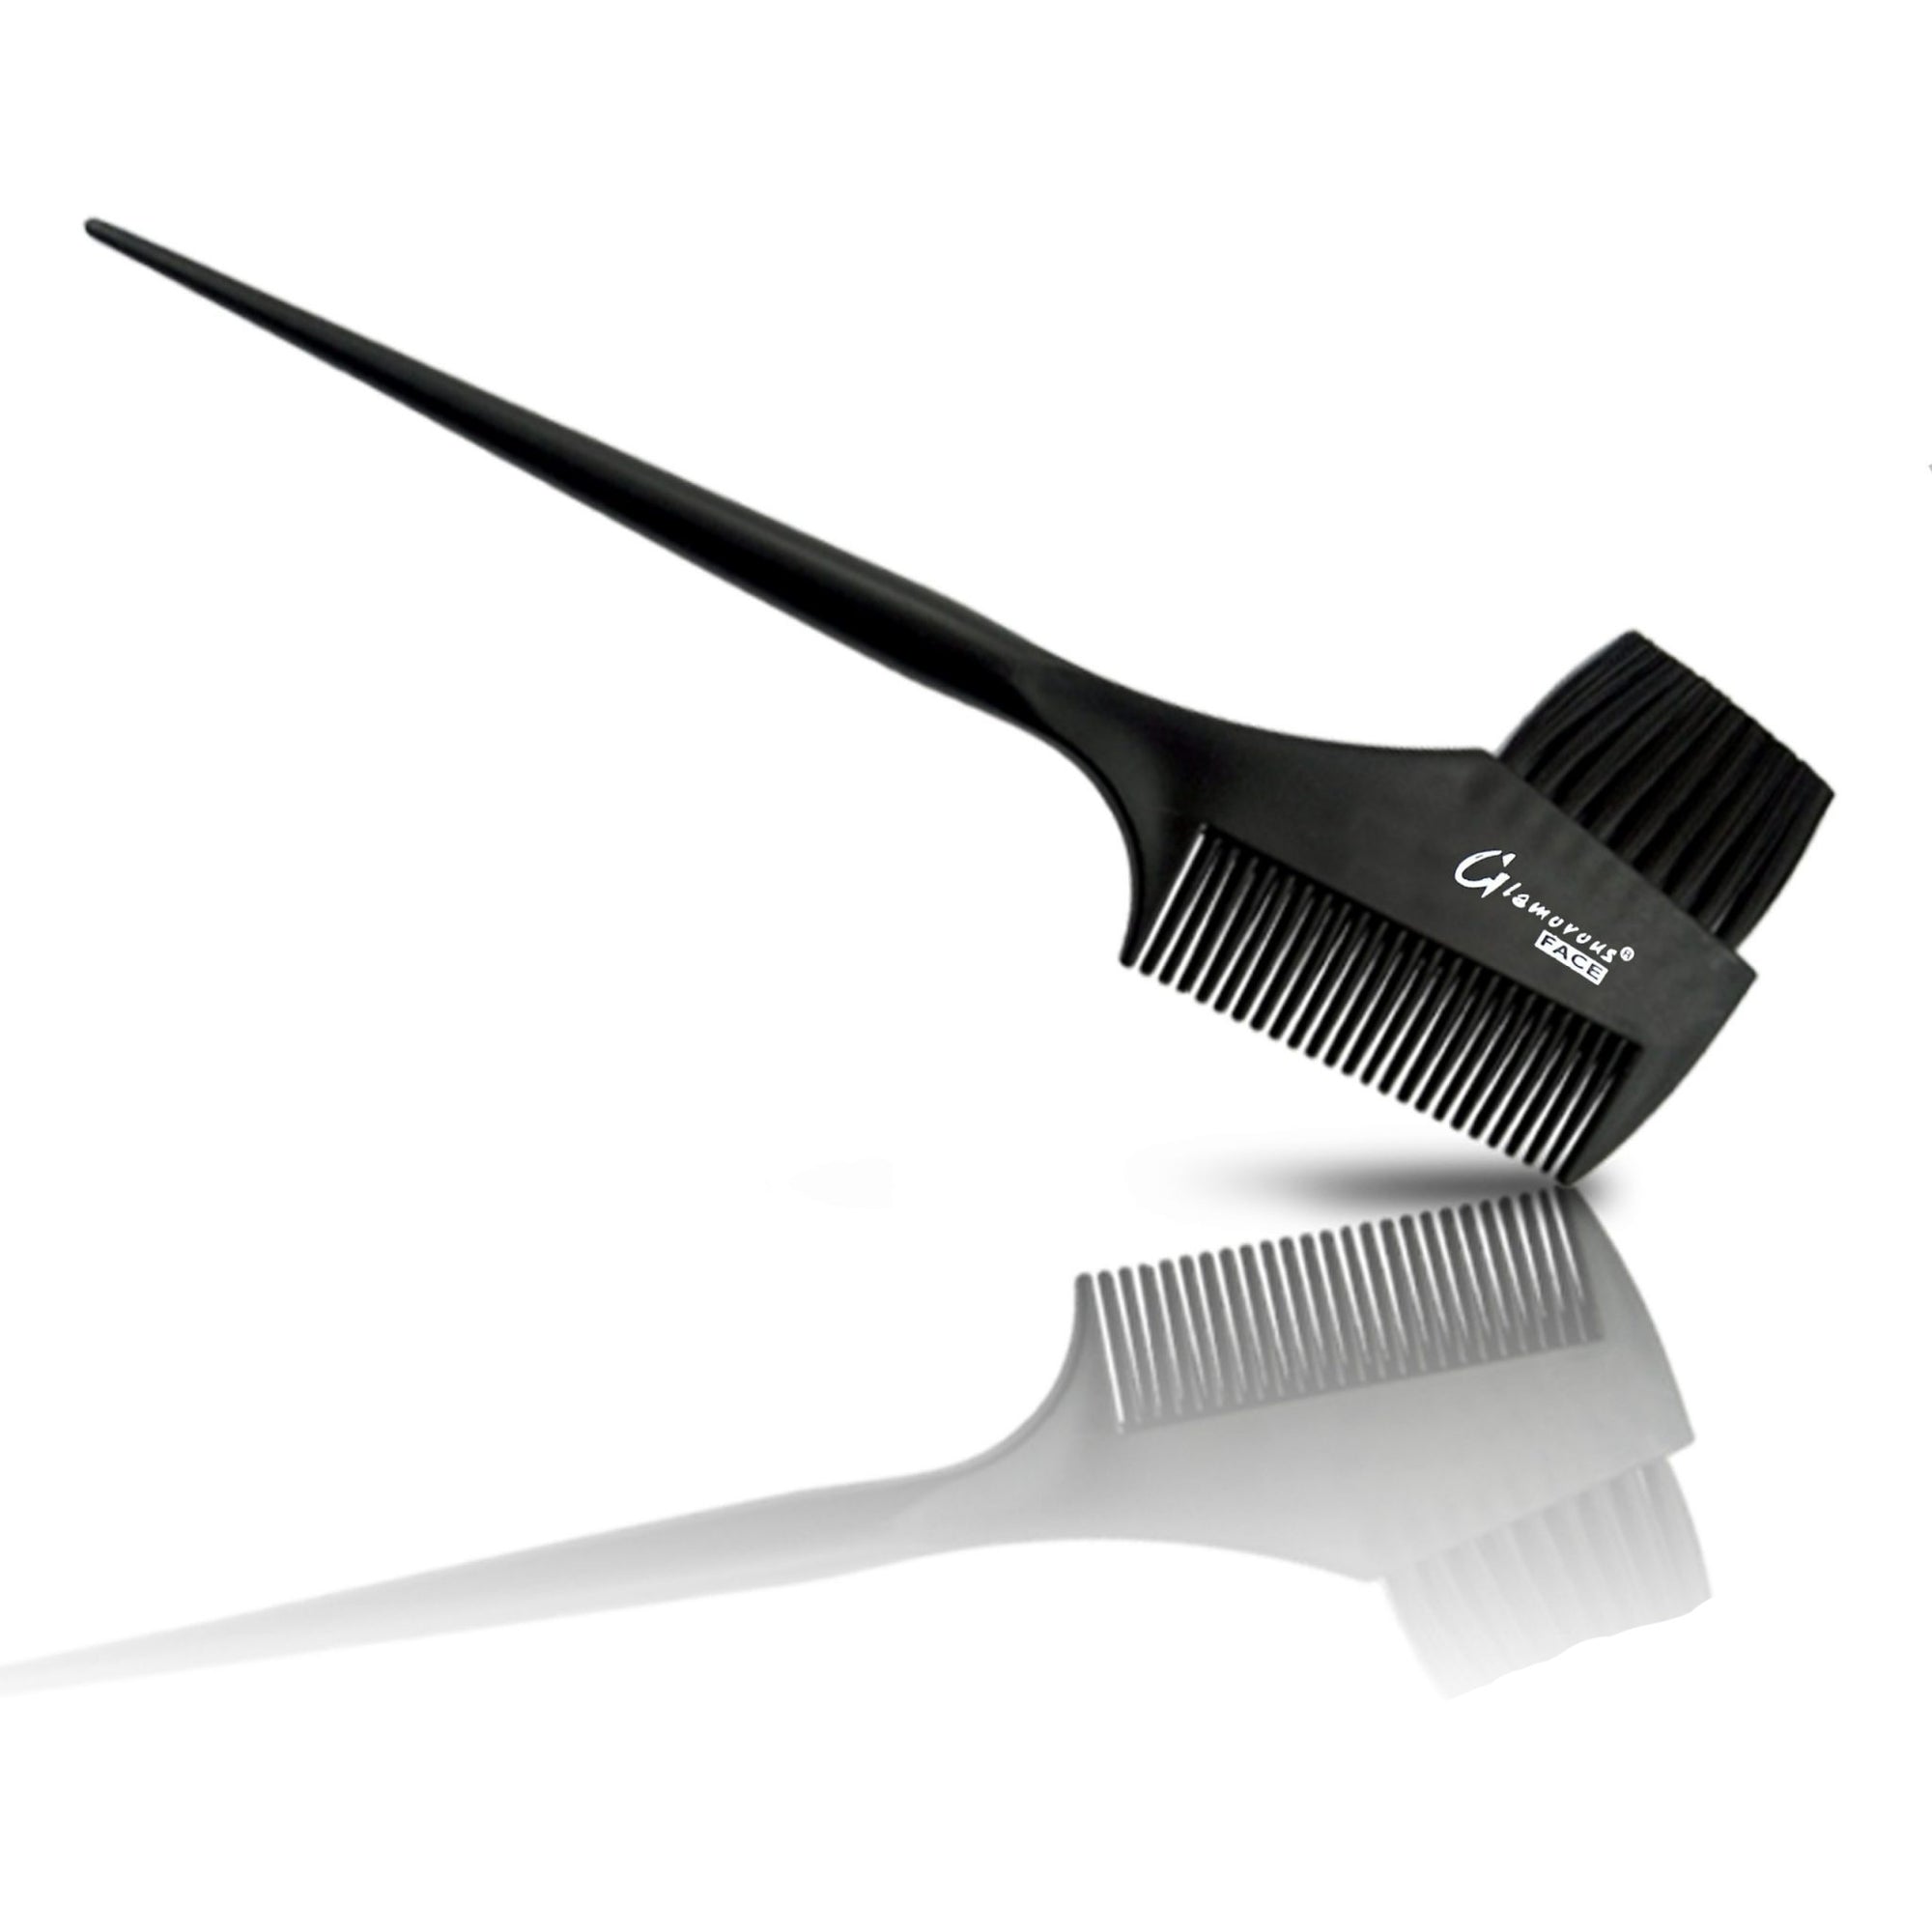 Glamorous Face Comb 2 in 1 Brush and Comb freeshipping - lasertag.pk